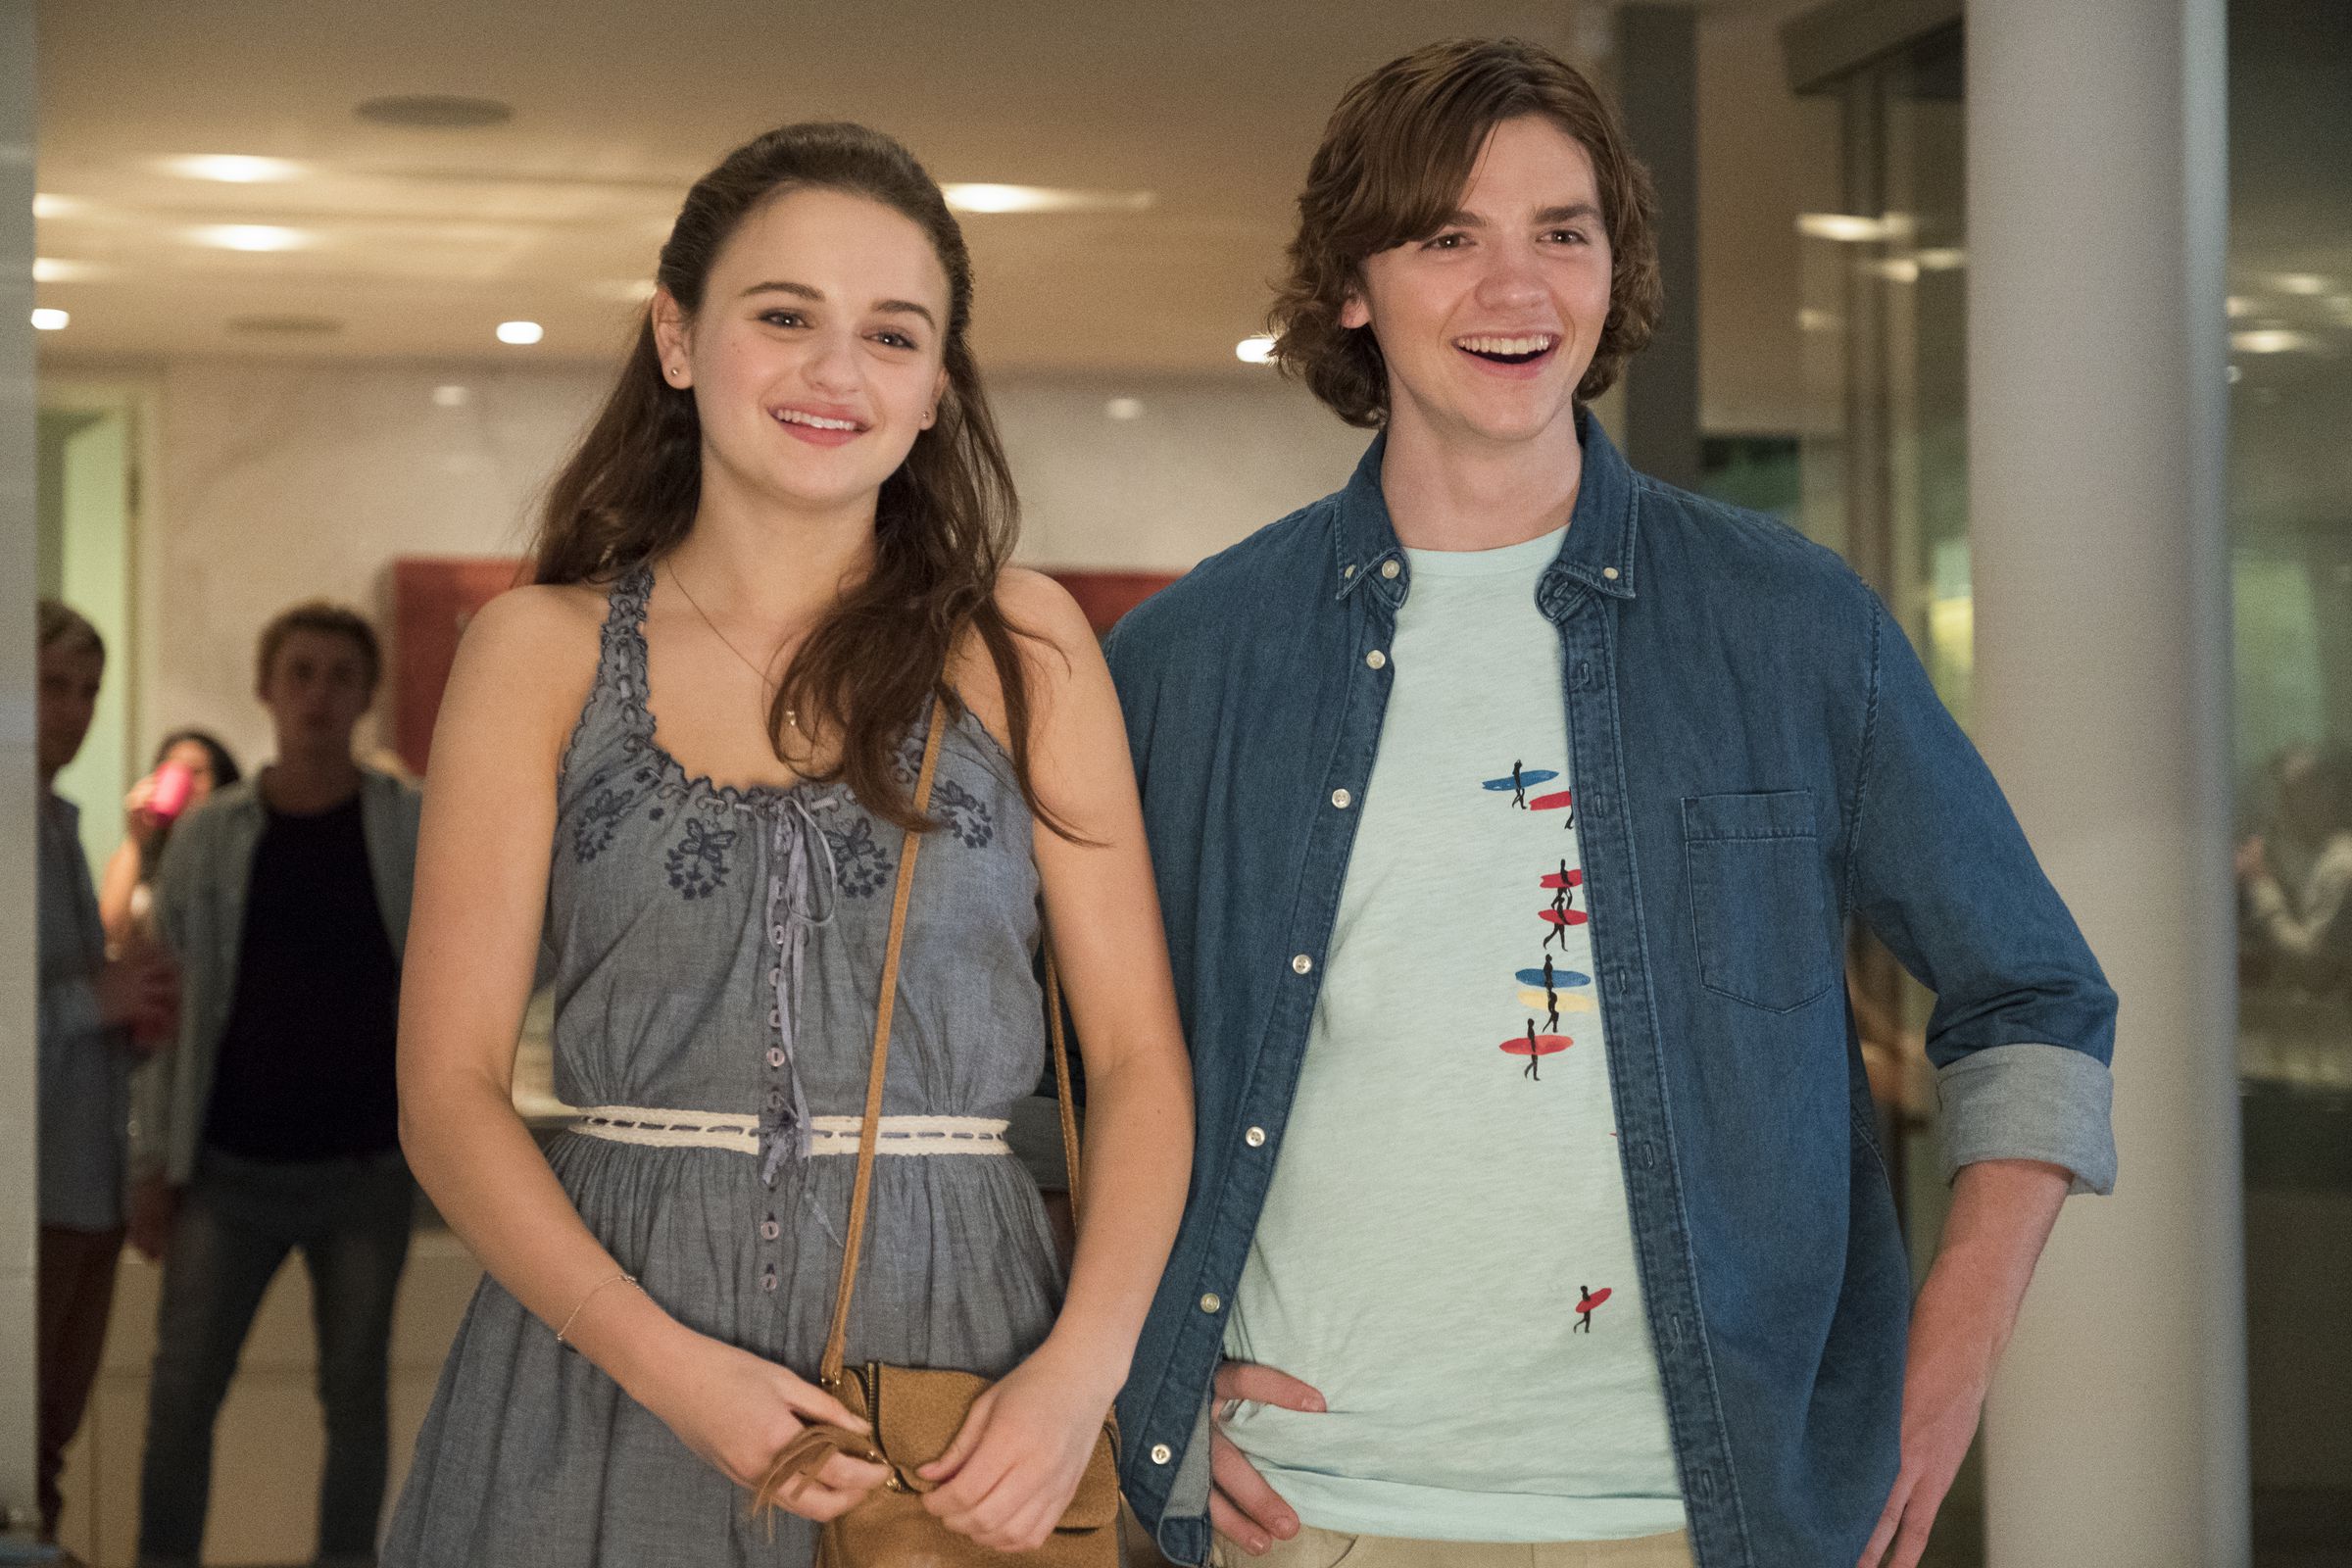 A production still from The Kissing Booth, a Wattpad story adapted into a Netflix film.